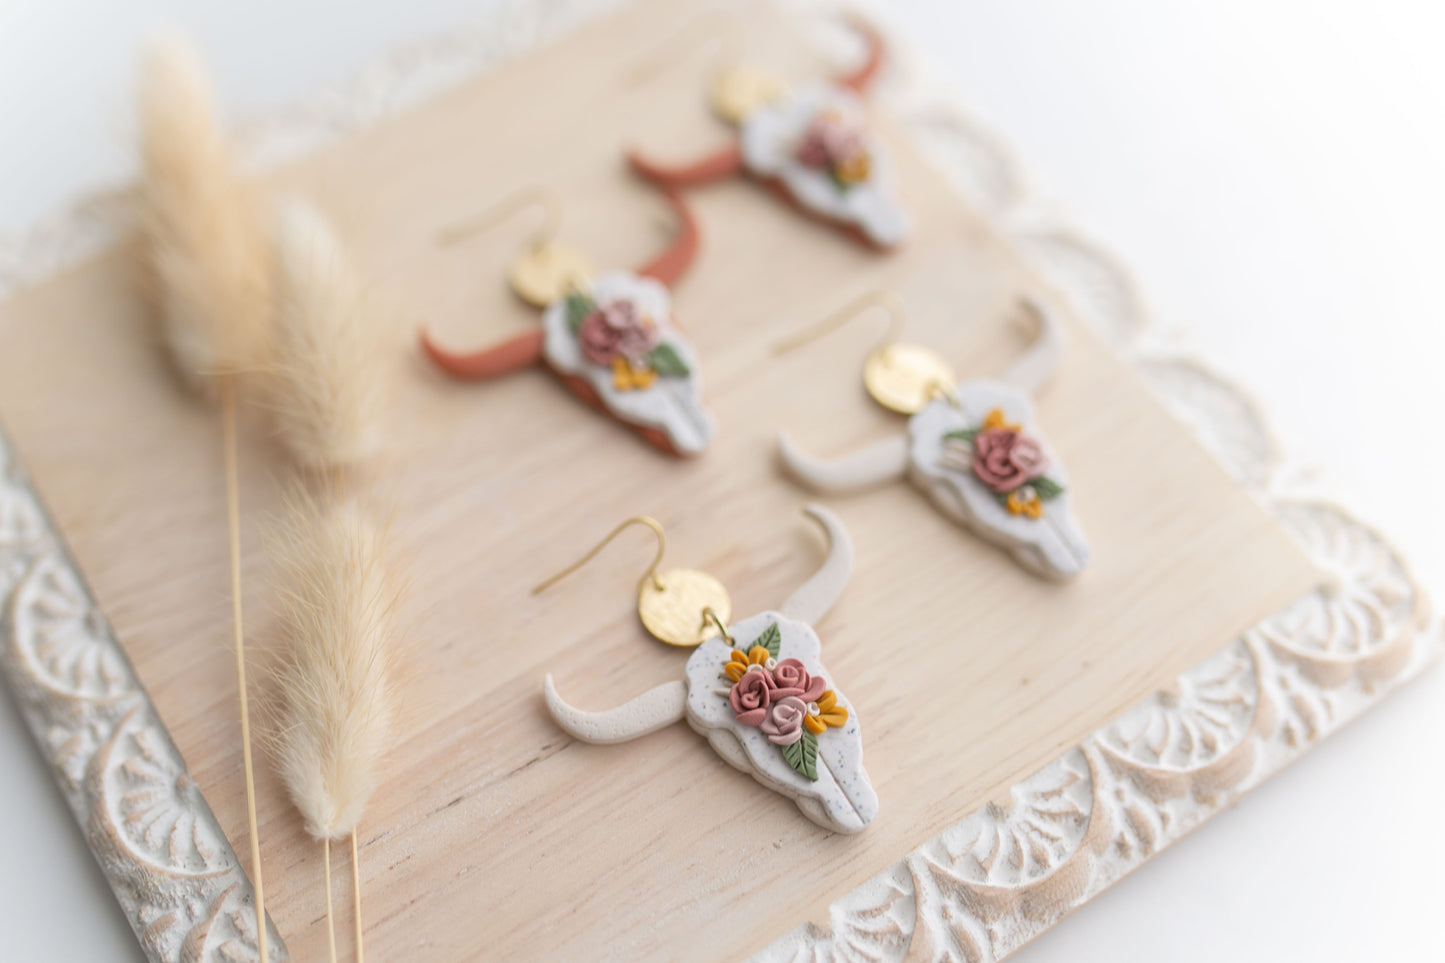 Clay earring |tera-cotta floral longhorns | Southwest Collection